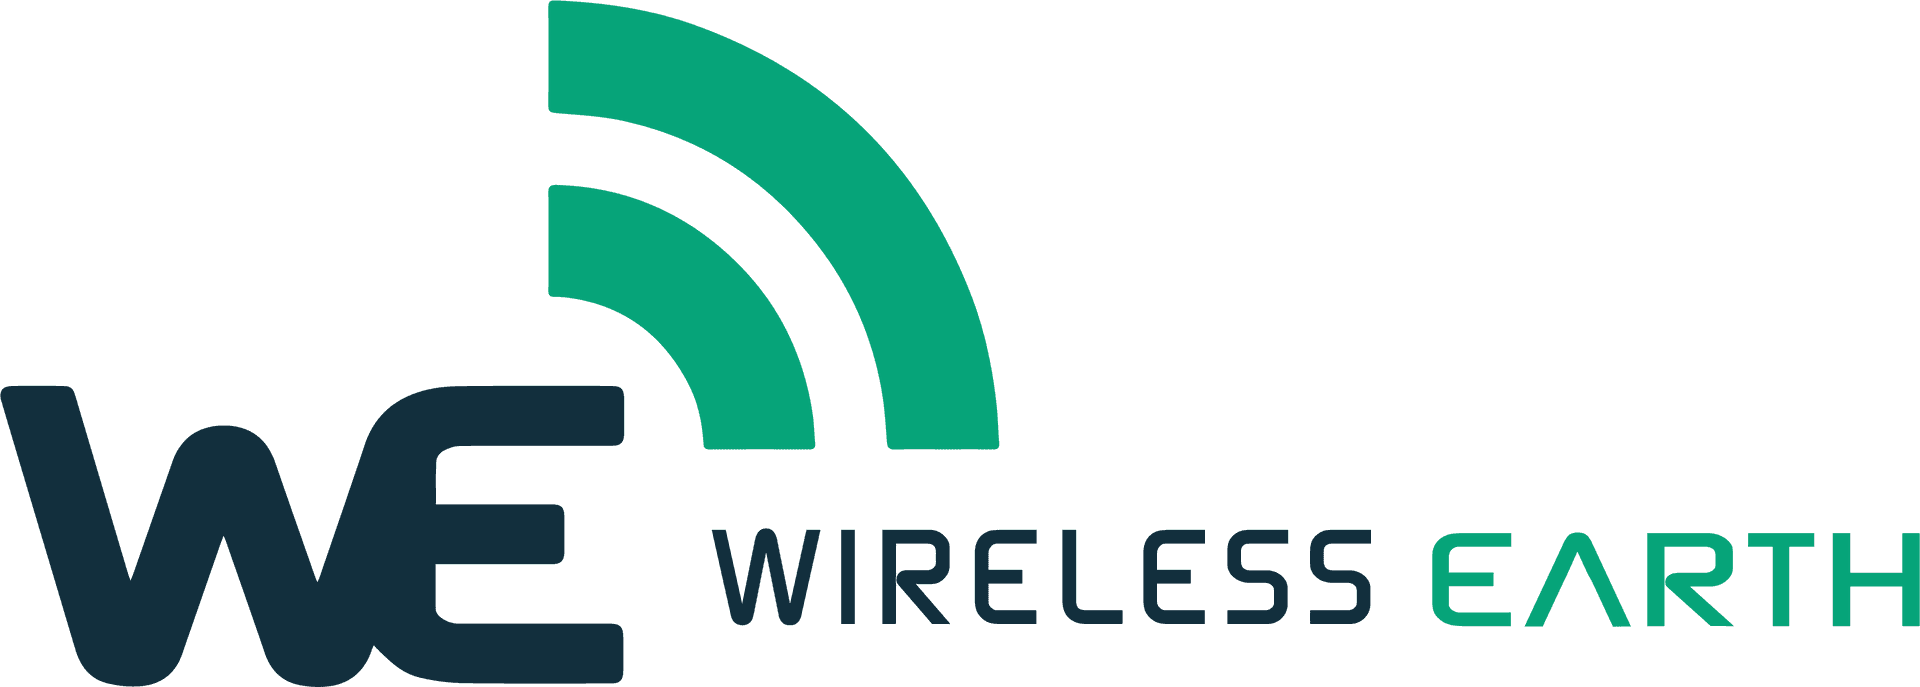 Wireless Earth Logo Design PNG image